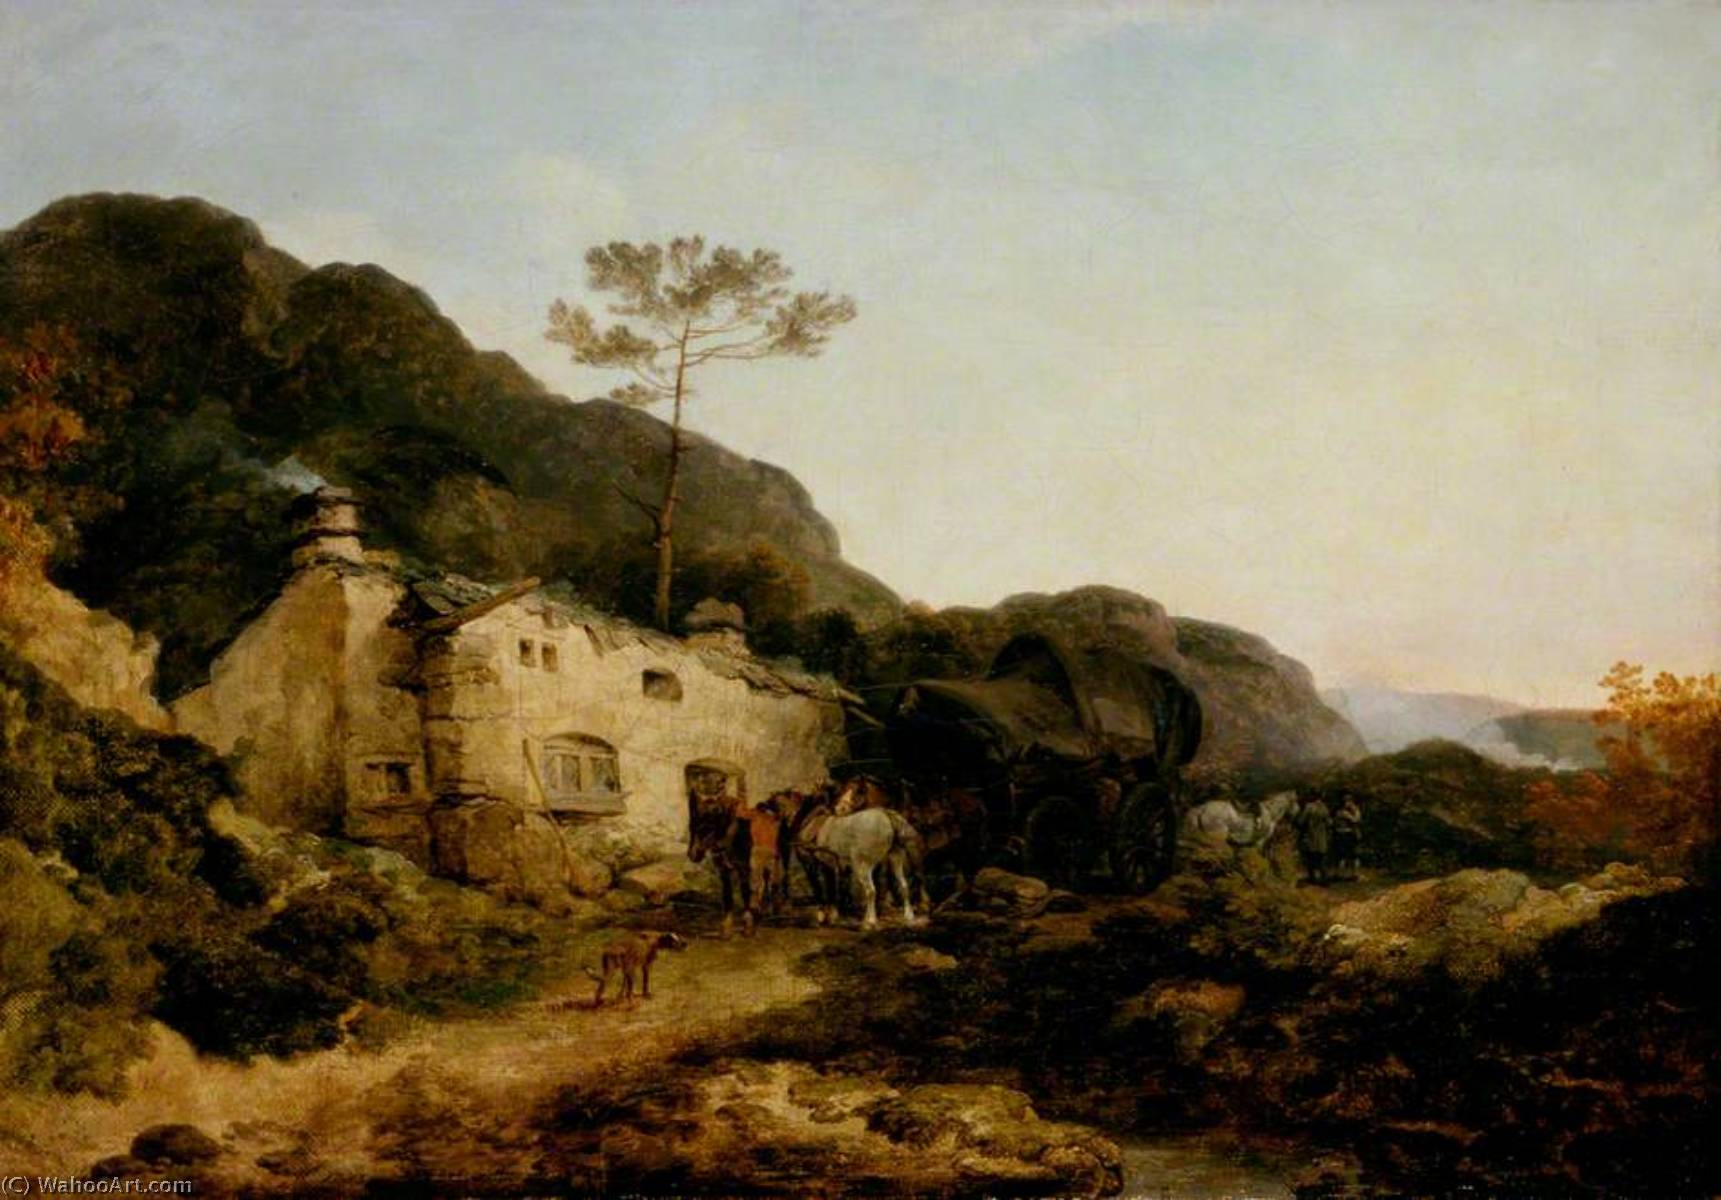 Wikioo.org - สารานุกรมวิจิตรศิลป์ - จิตรกรรม Philip Jacques De Loutherbourg - A Cottage in Patterdale, Westmoreland